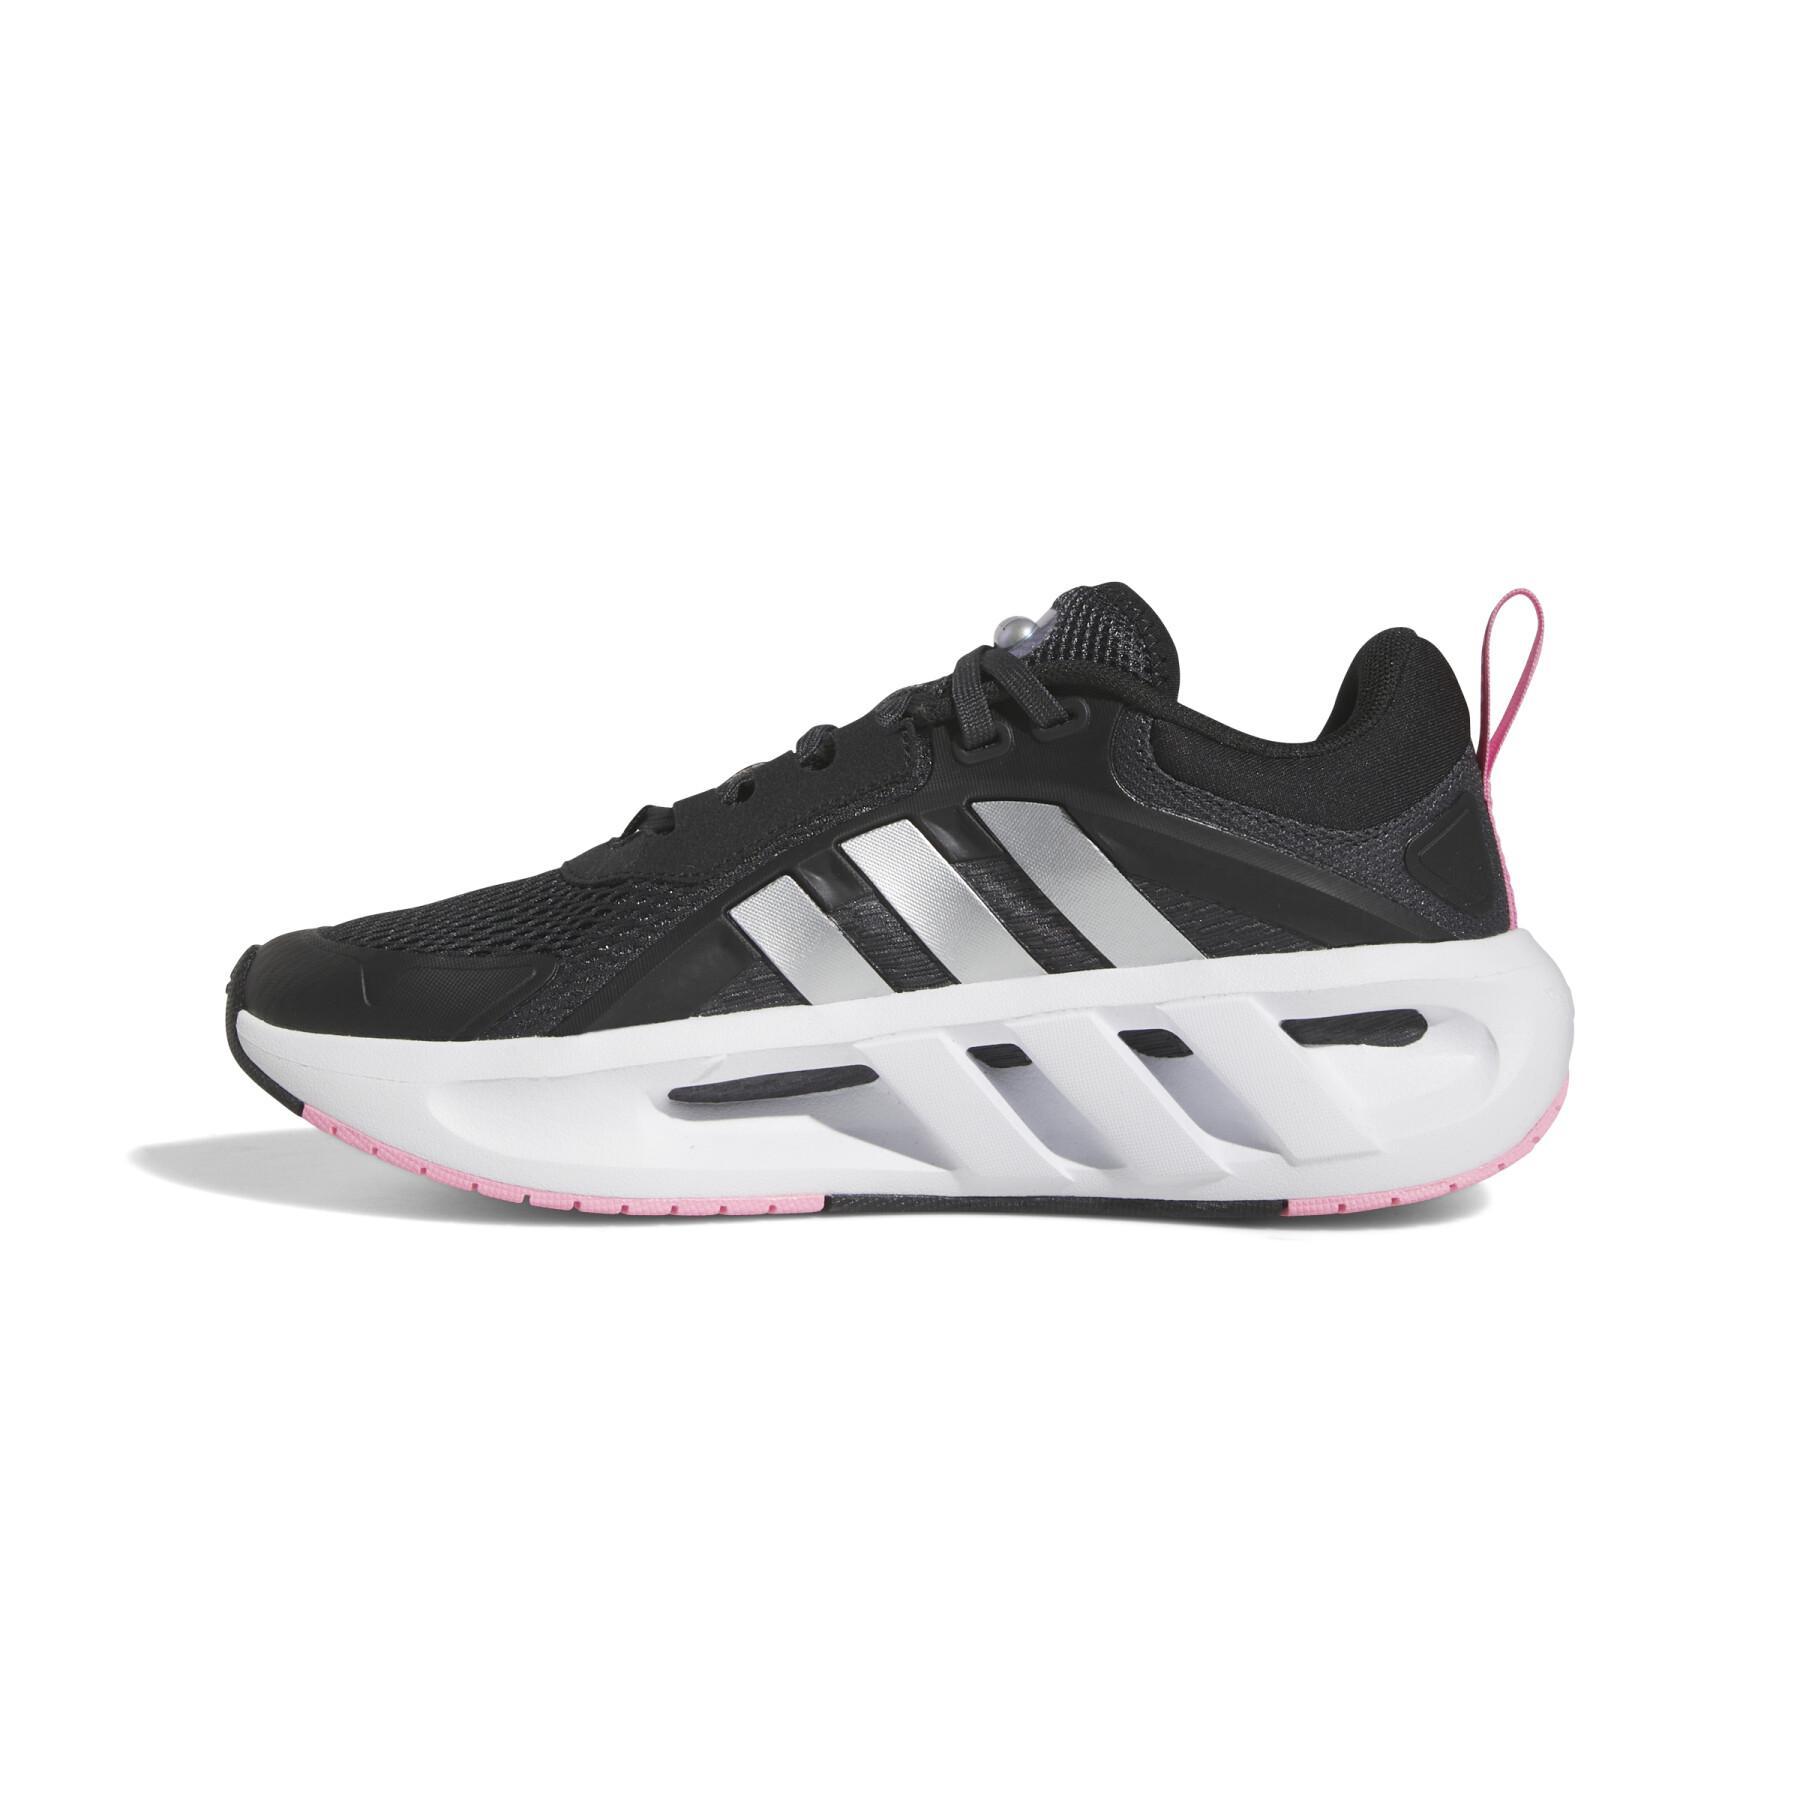 Shoes from running femme adidas Ventador Climacool